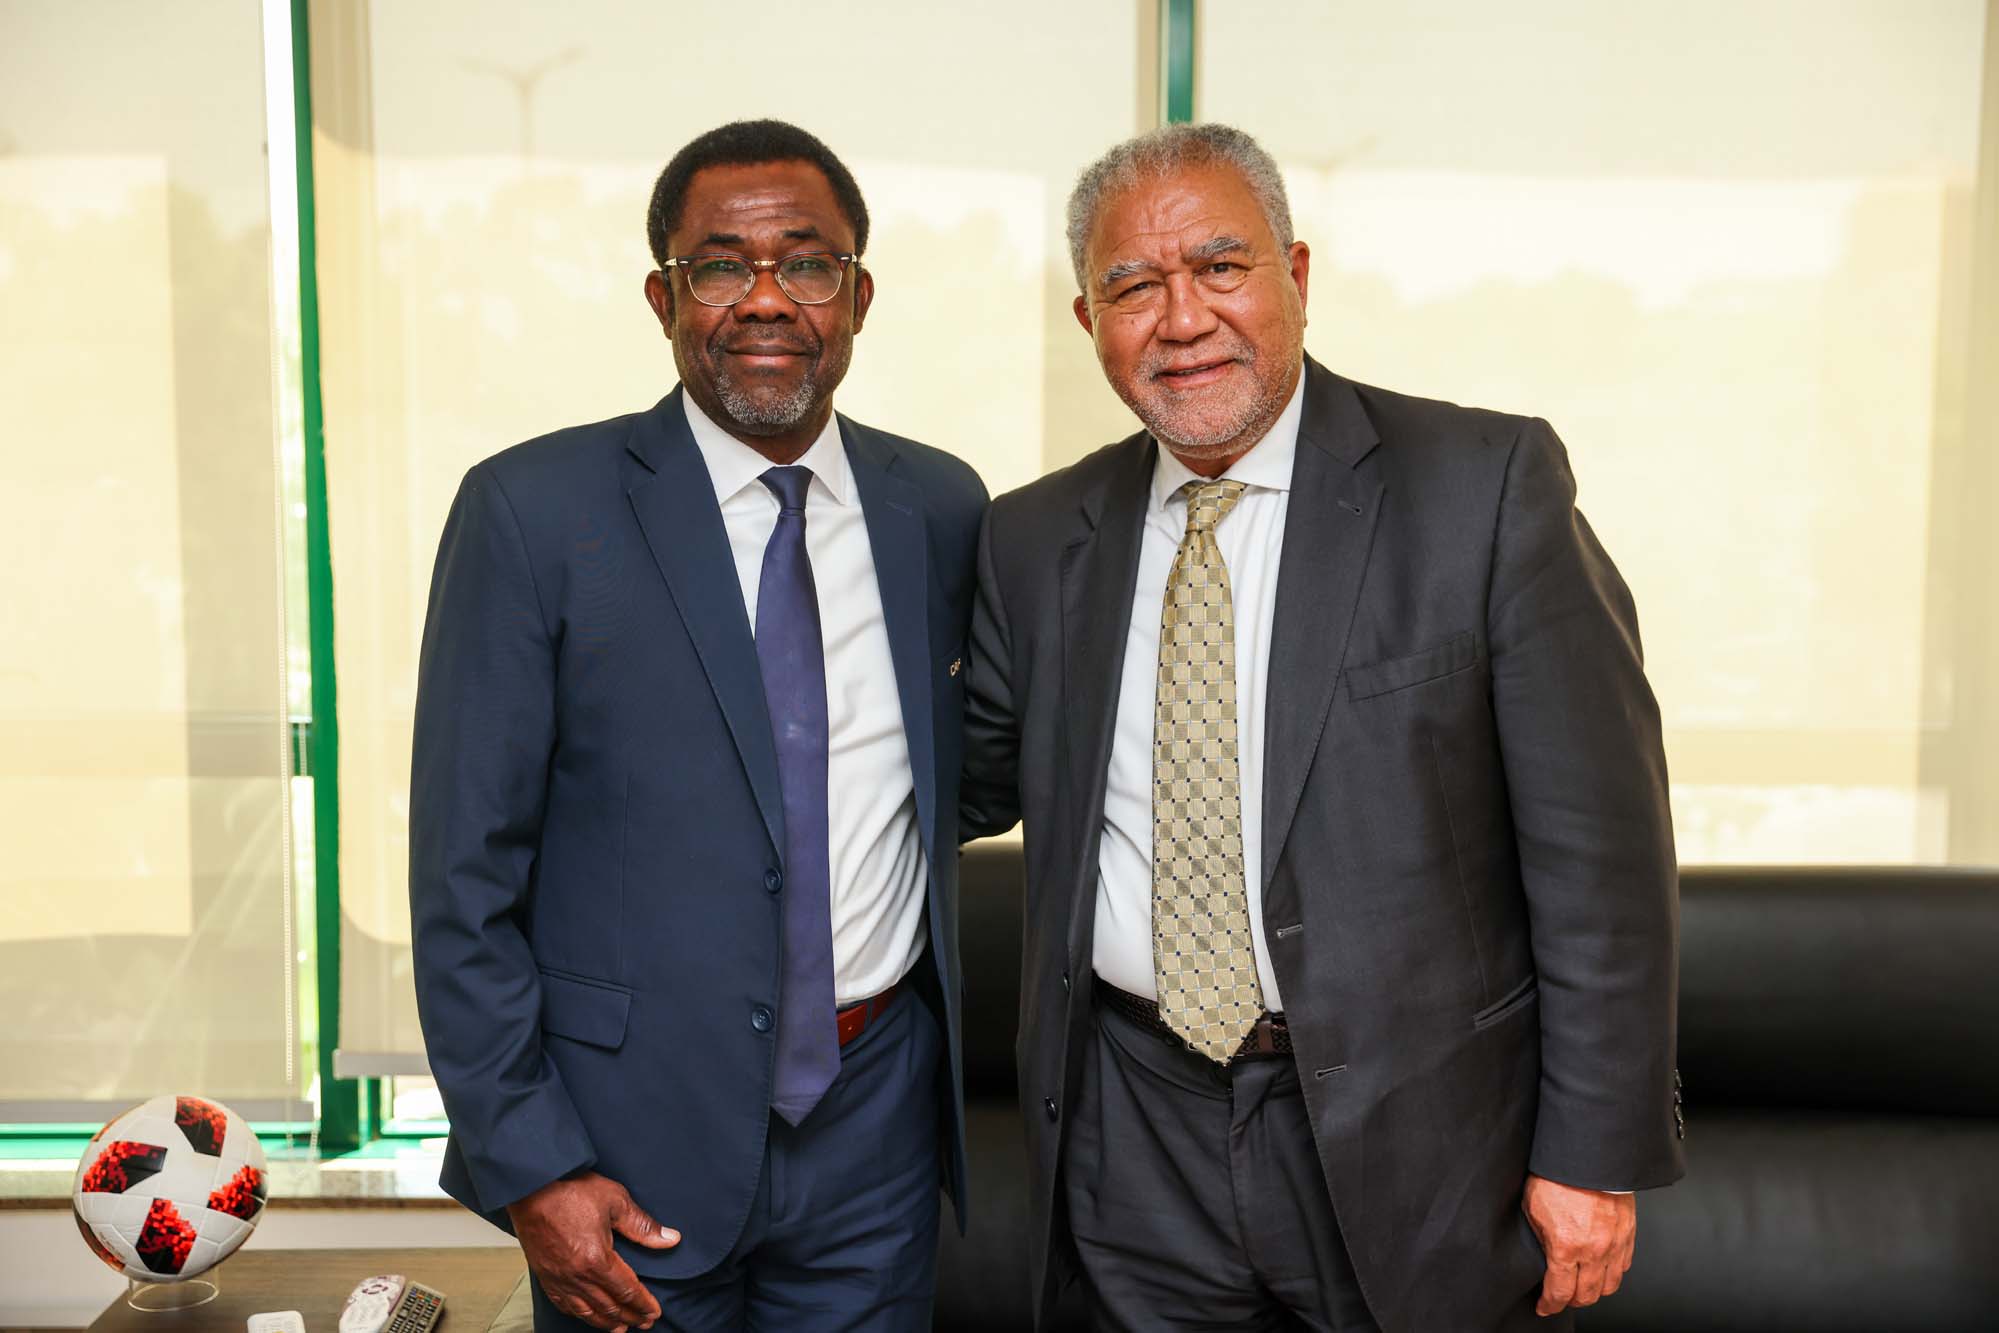 CAF Secretary General, Mr Veron Mosengo-Omba and University of Cape Town (UCT) Council Chair, Adv Norman Arendse SC, at CAF HQ in Cairo, Egypt